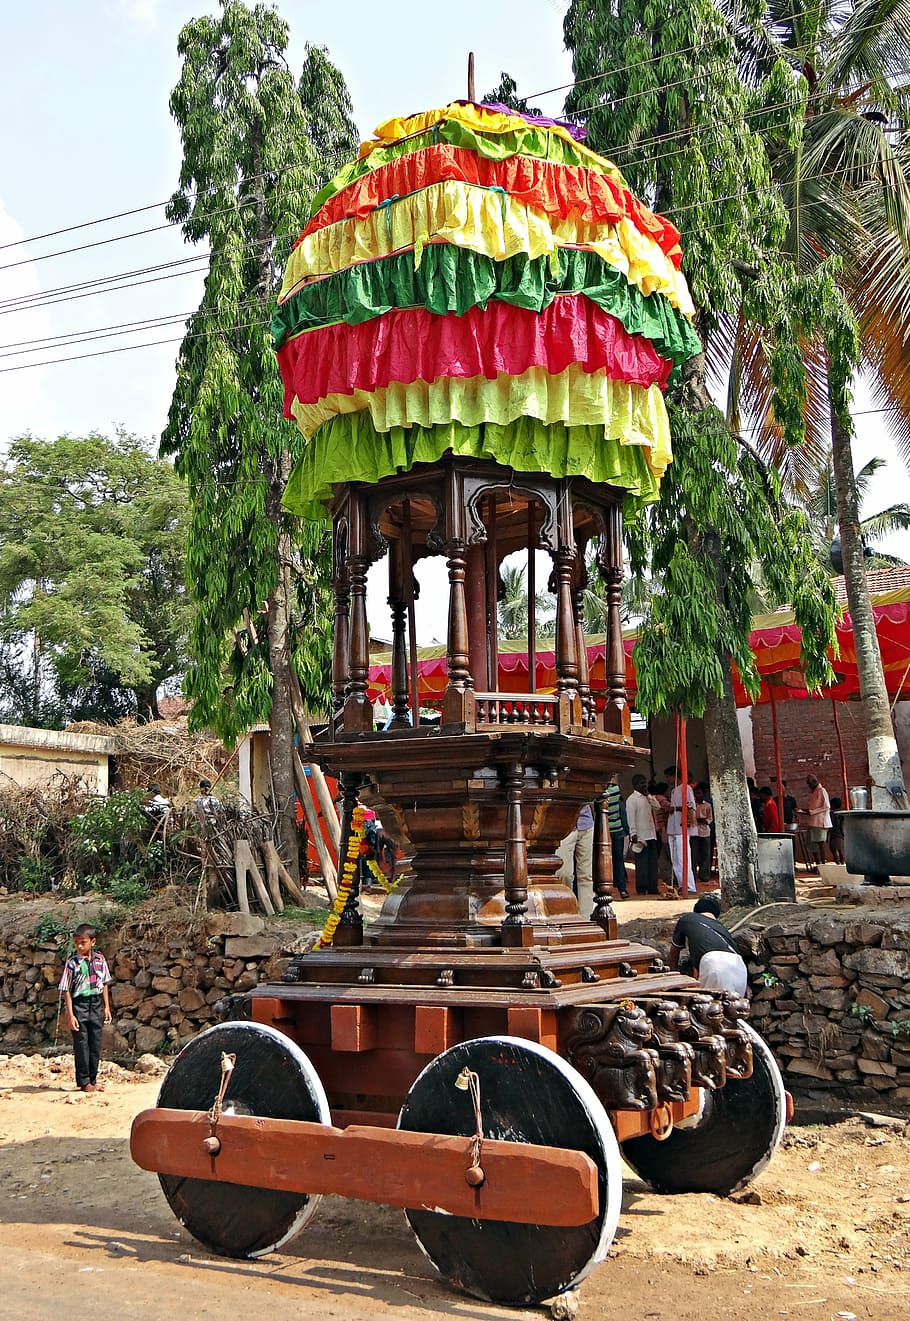 chariot, decorated, wooden, local festival, karnataka, india, built structure, architecture, day, plant